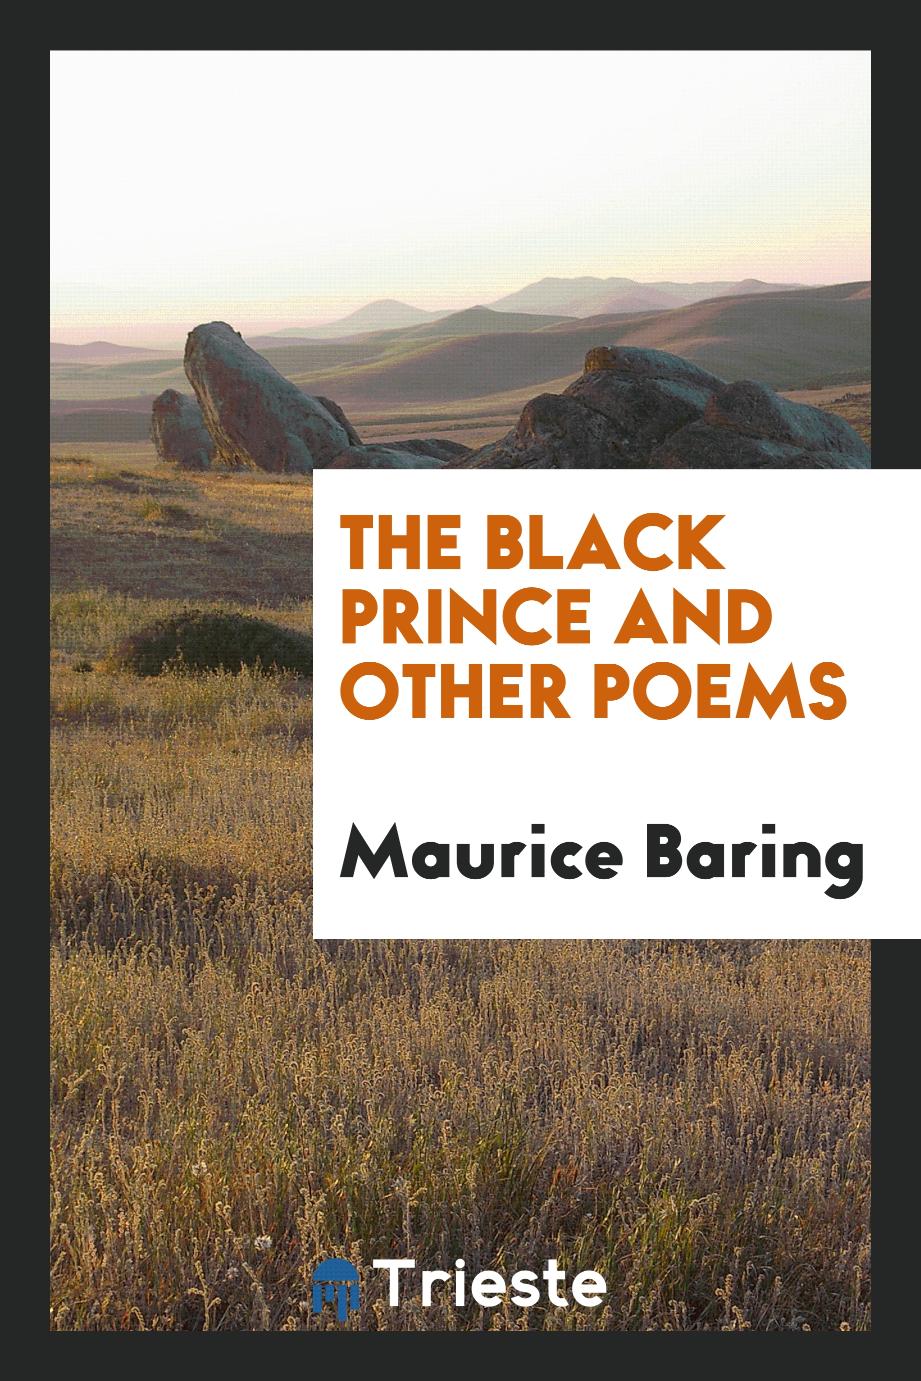 The Black Prince and Other Poems